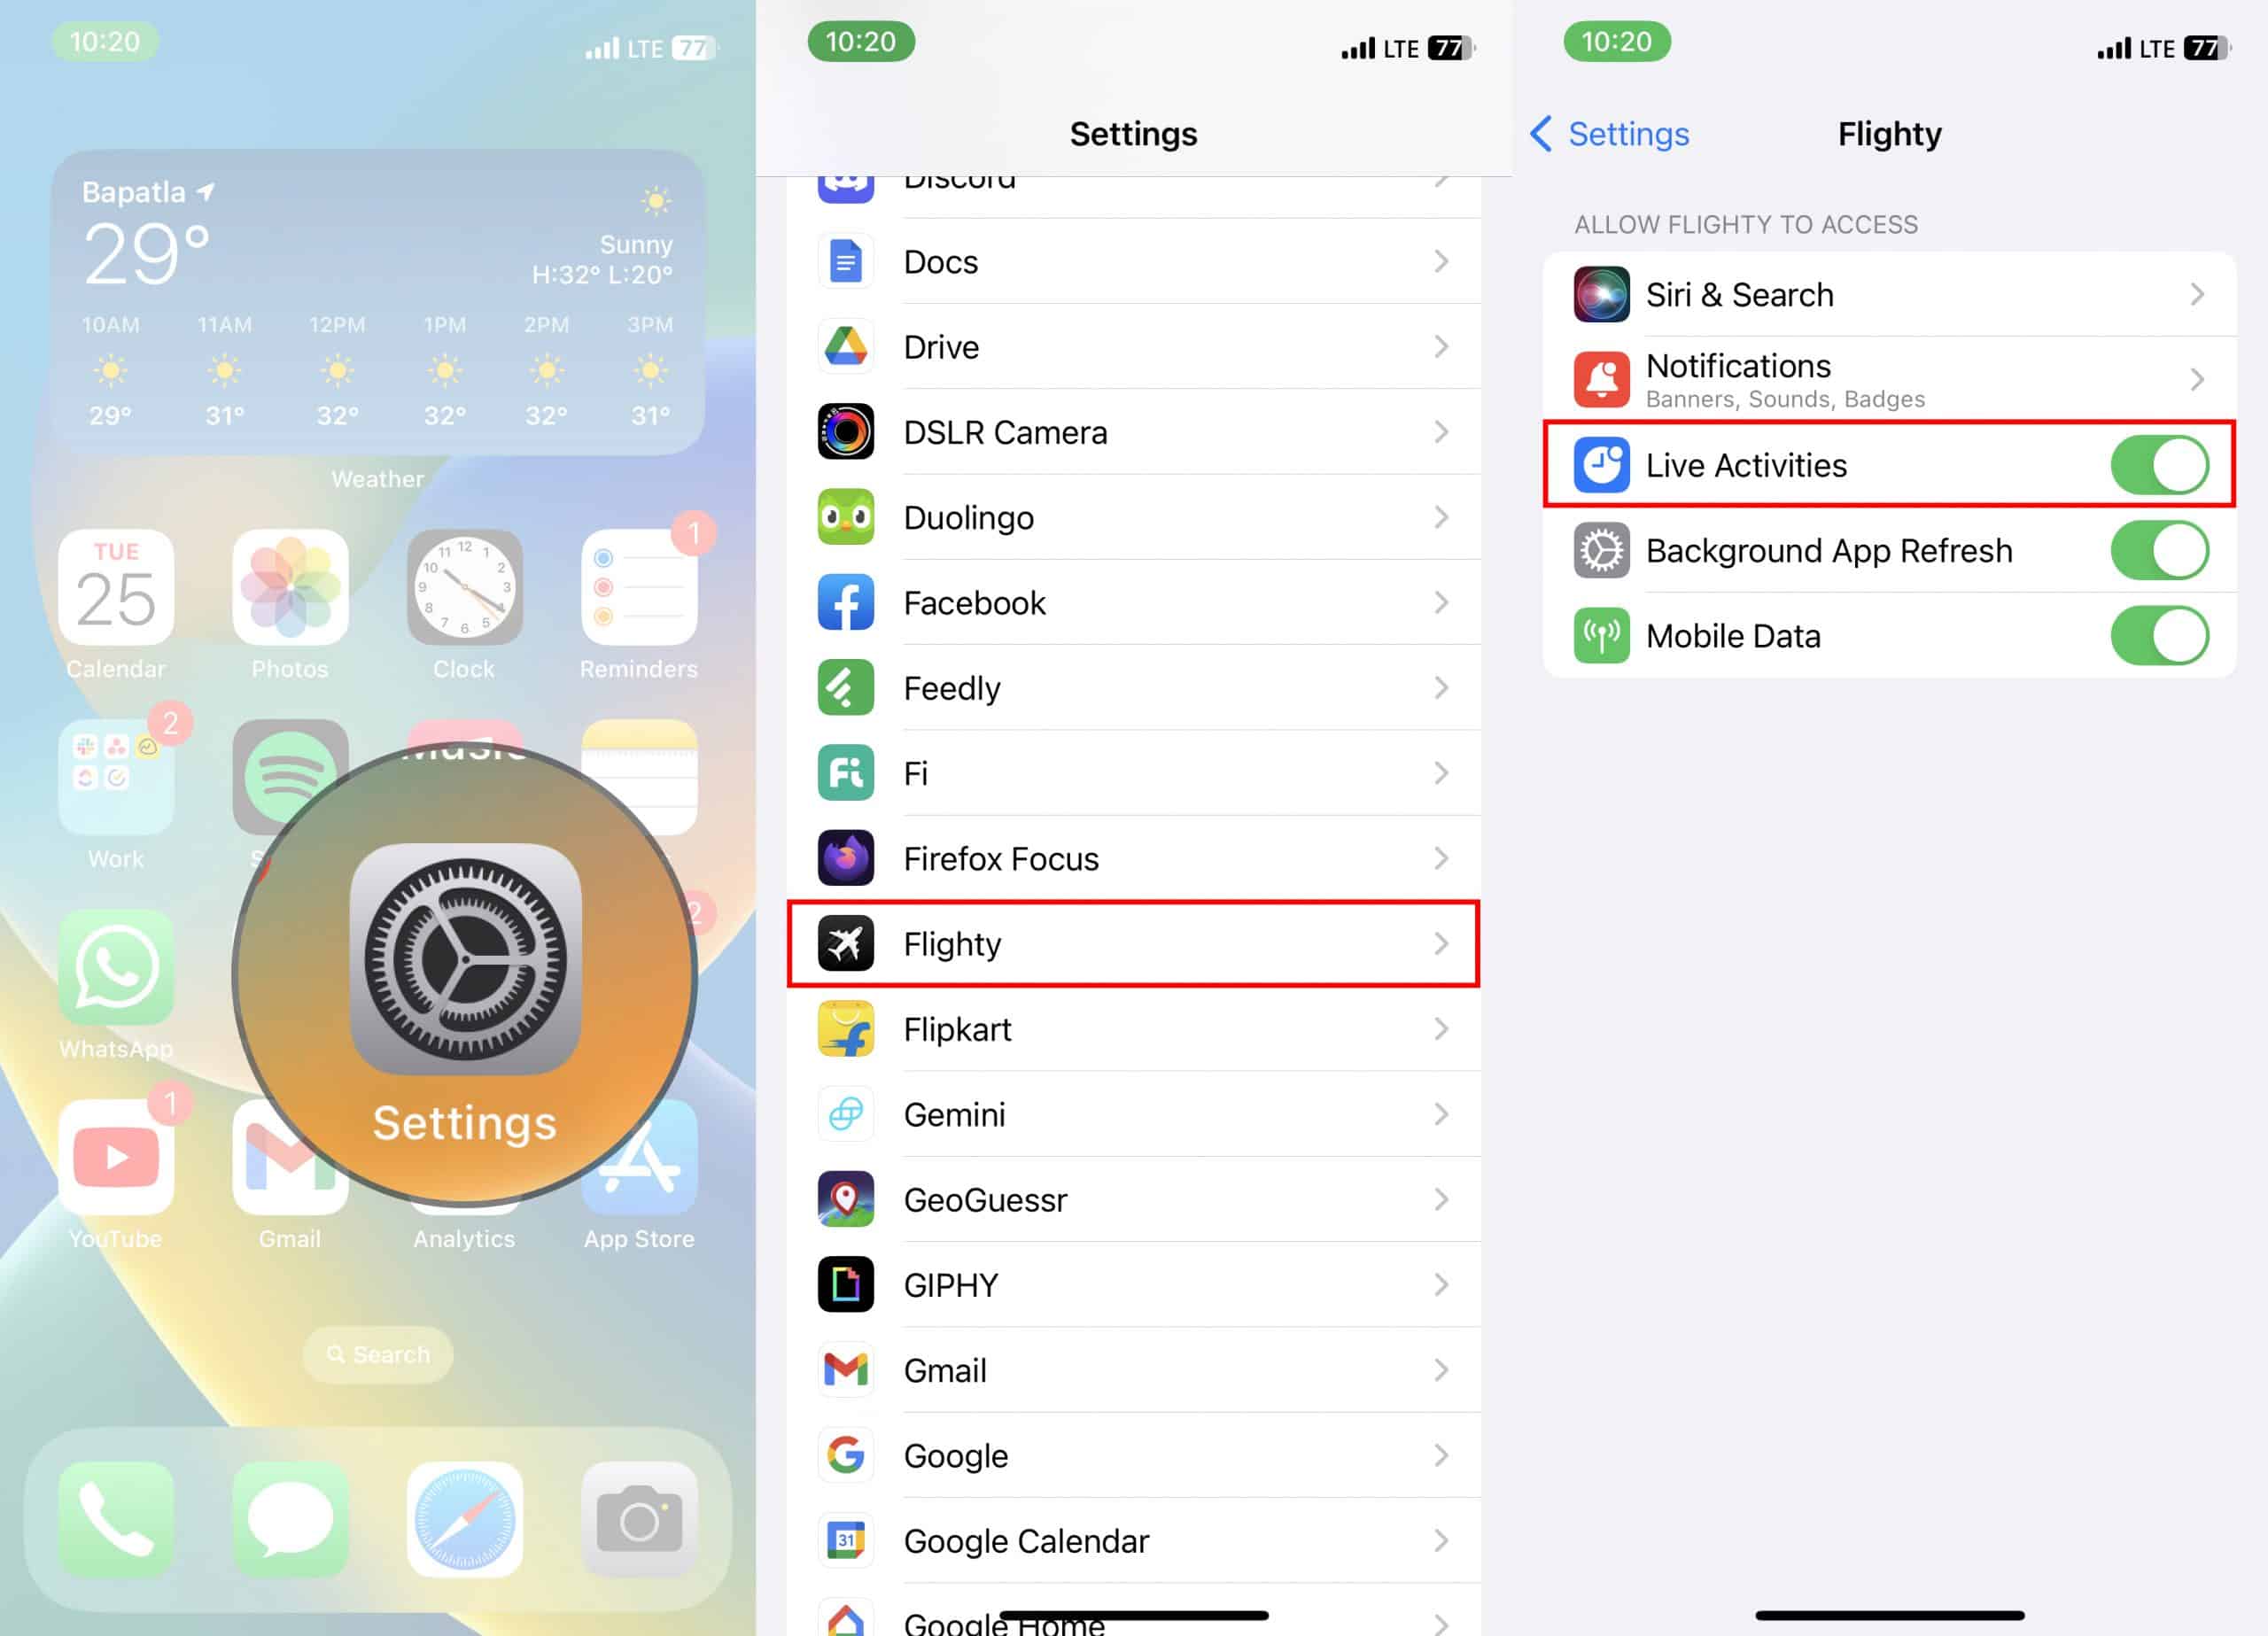 Enable Live Activities on iOS16 iPhone